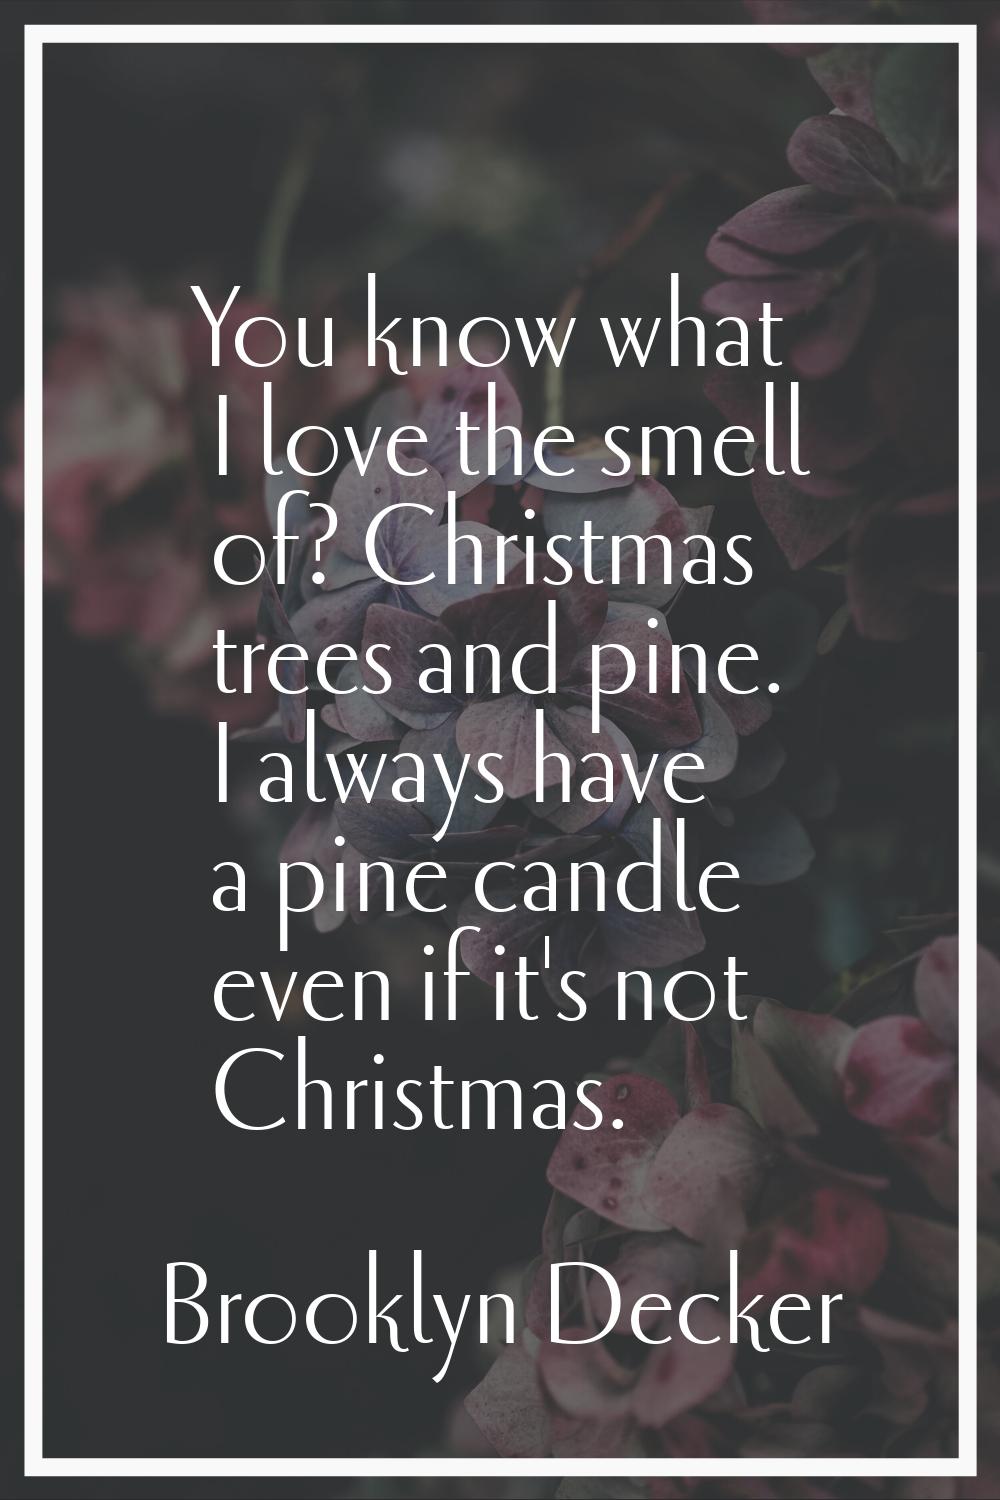 You know what I love the smell of? Christmas trees and pine. I always have a pine candle even if it